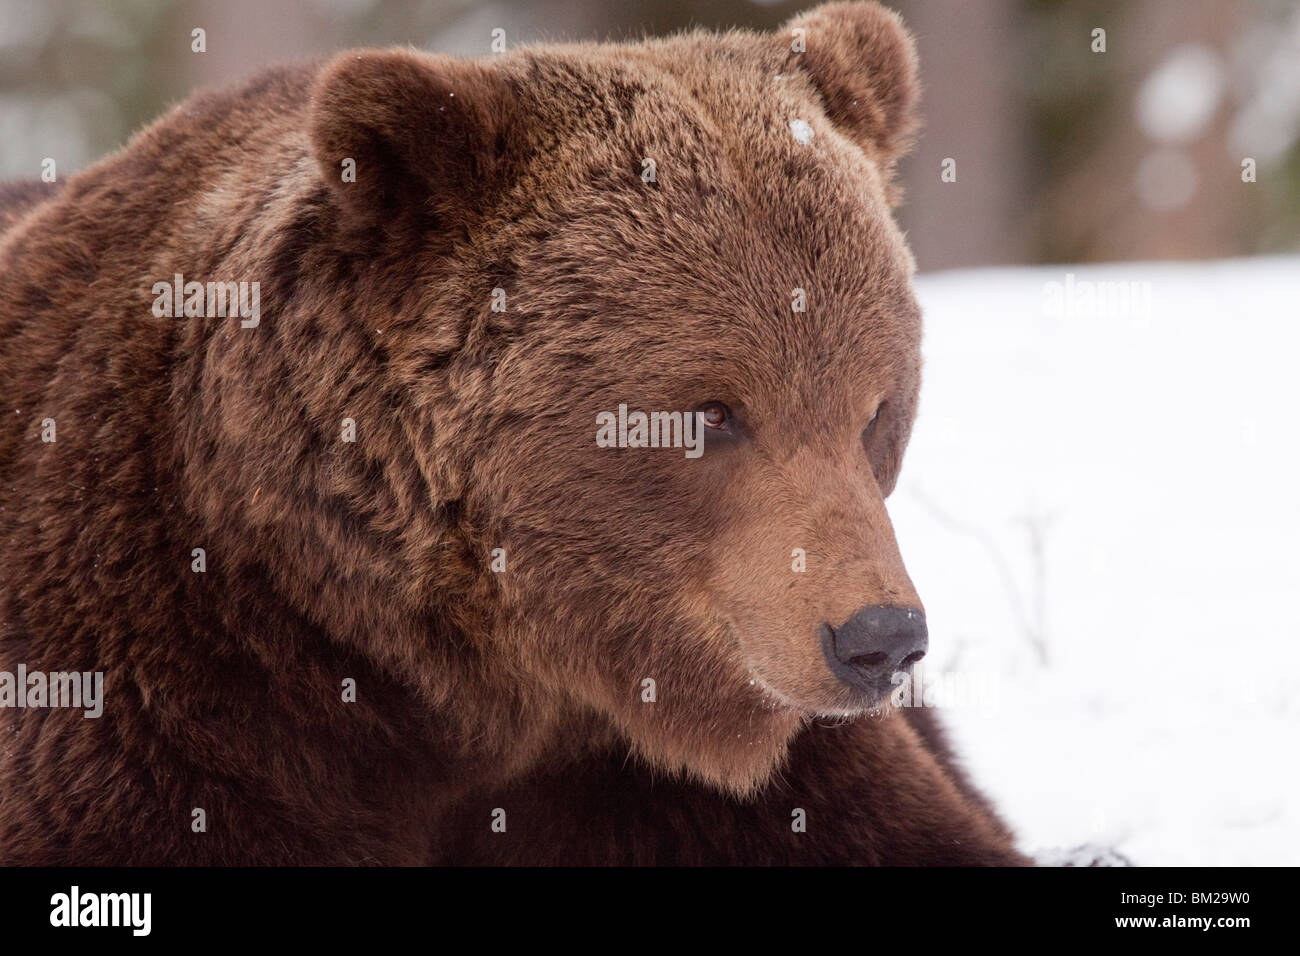 Eurasian brown bear in the snow in Taiga forest. Stock Photo